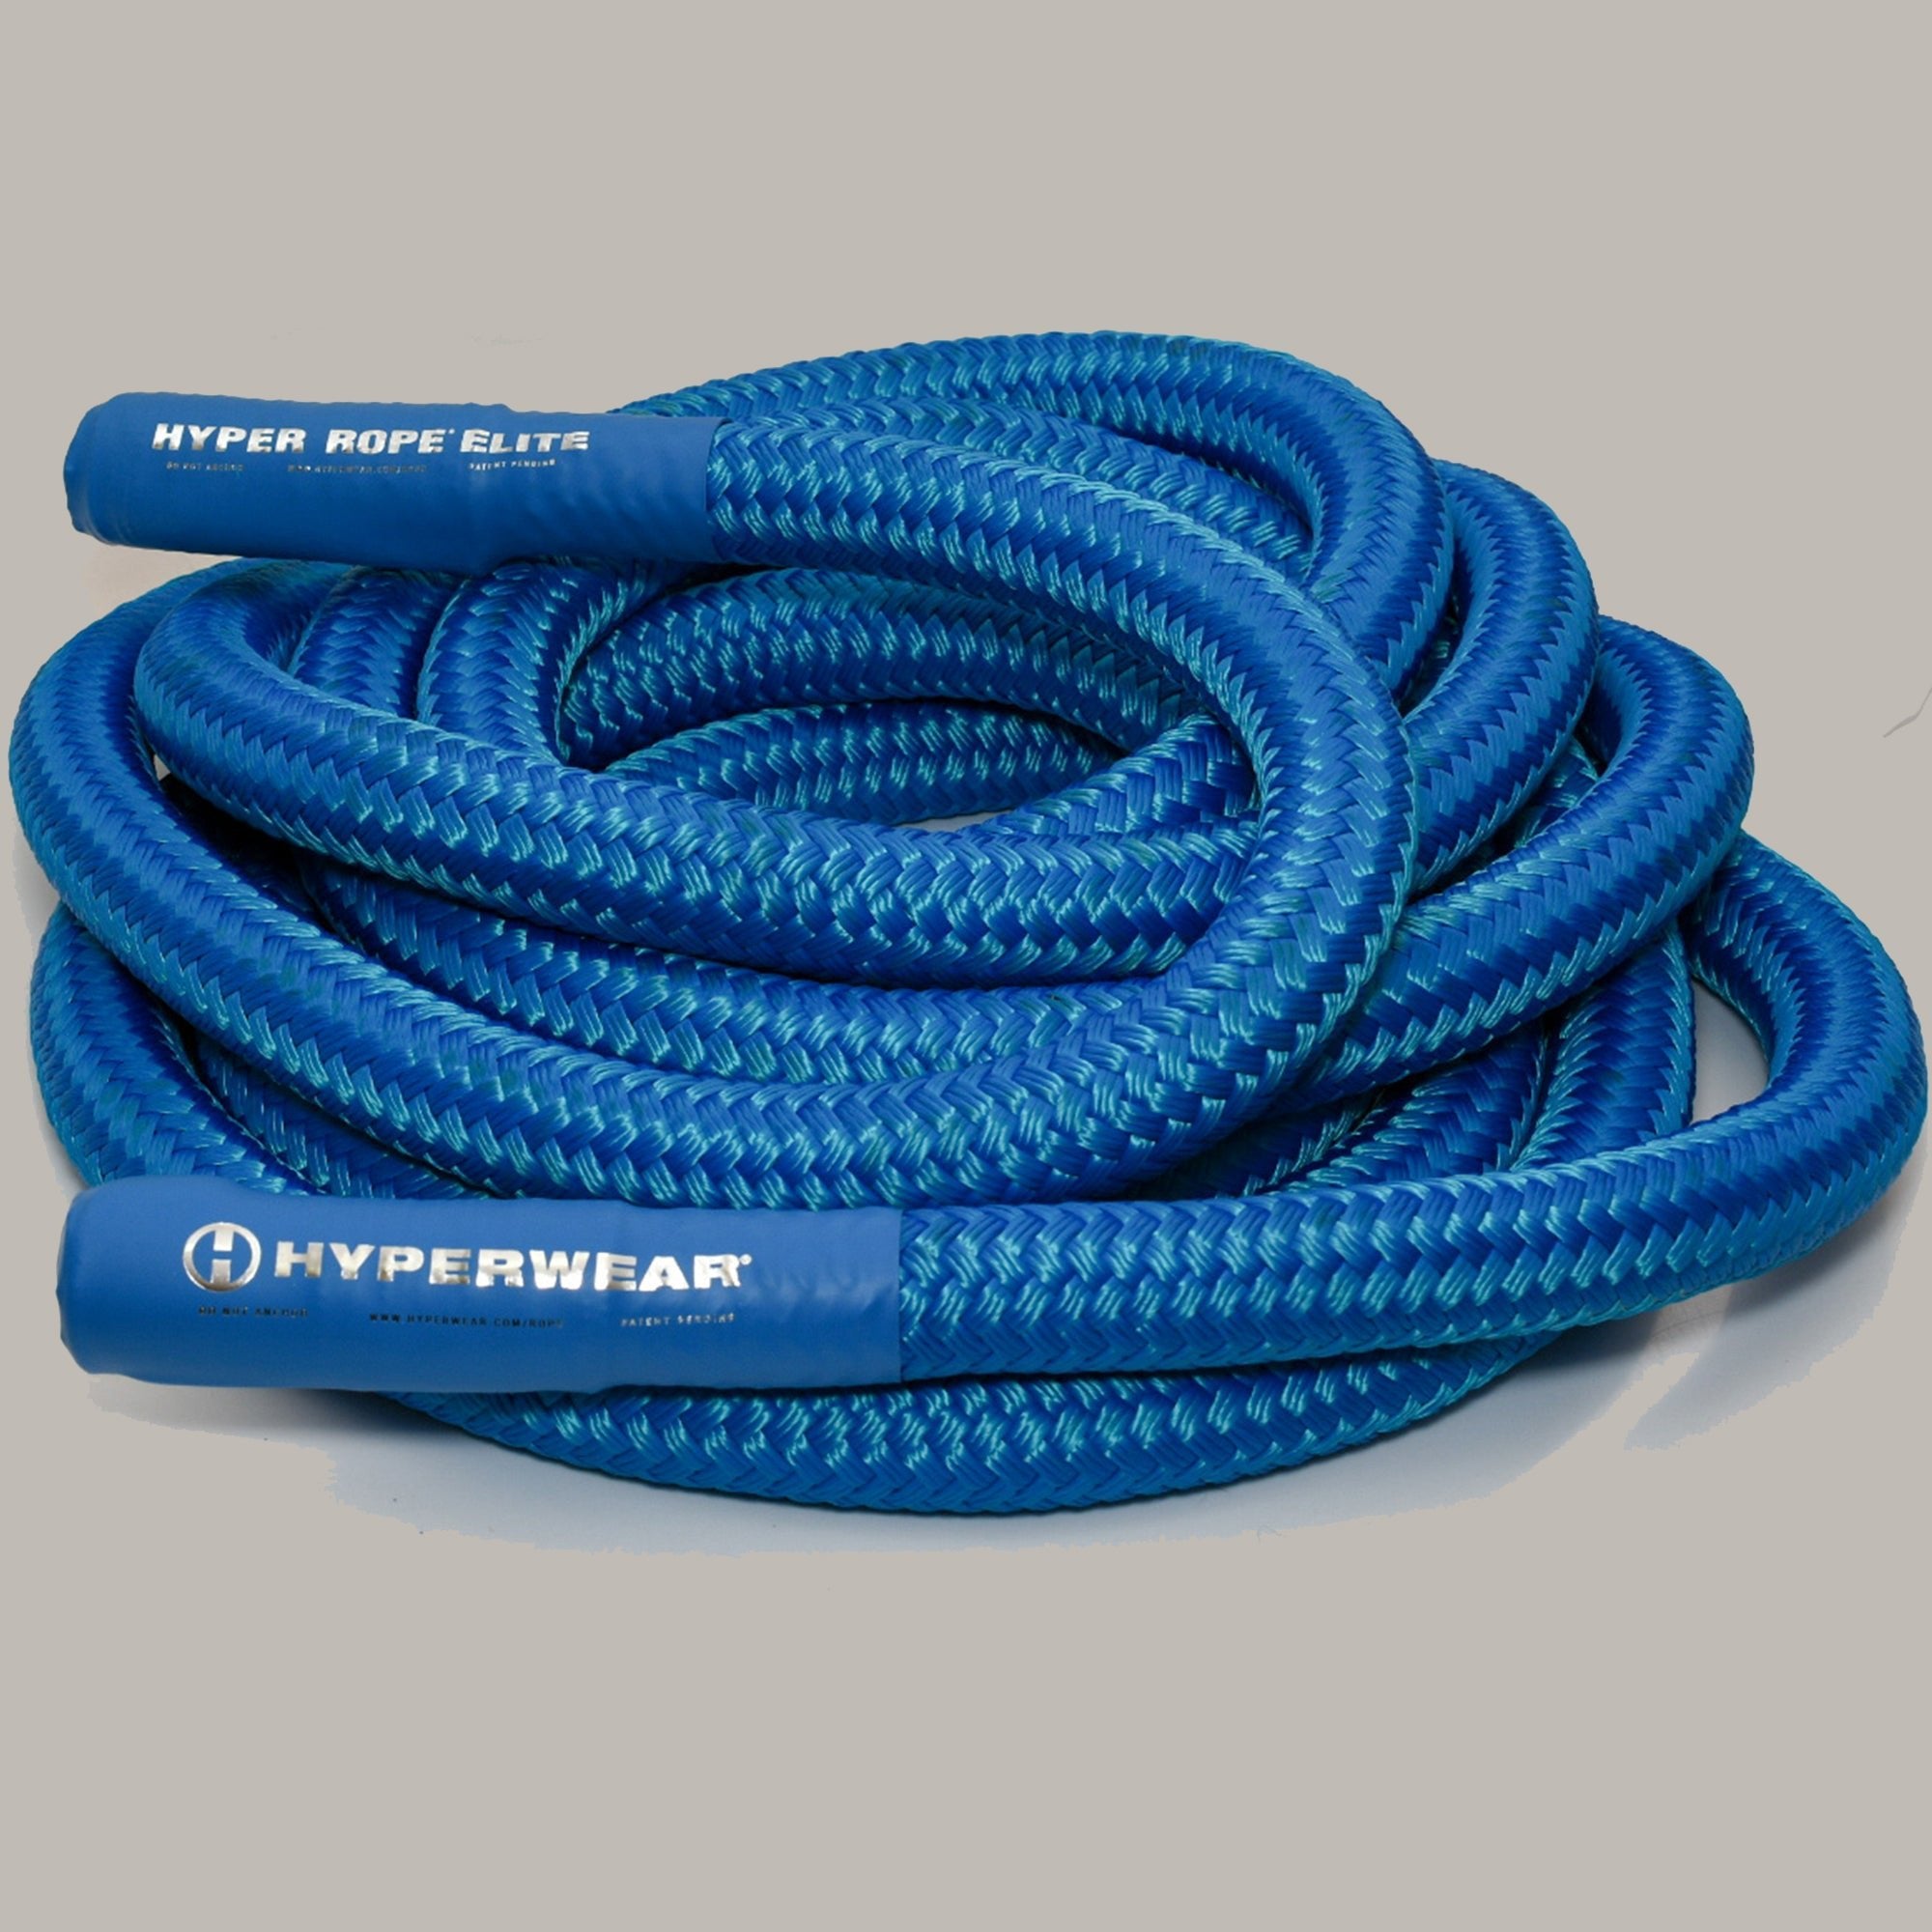 product photo of coiled blue hyper rope elite weighted battle rope